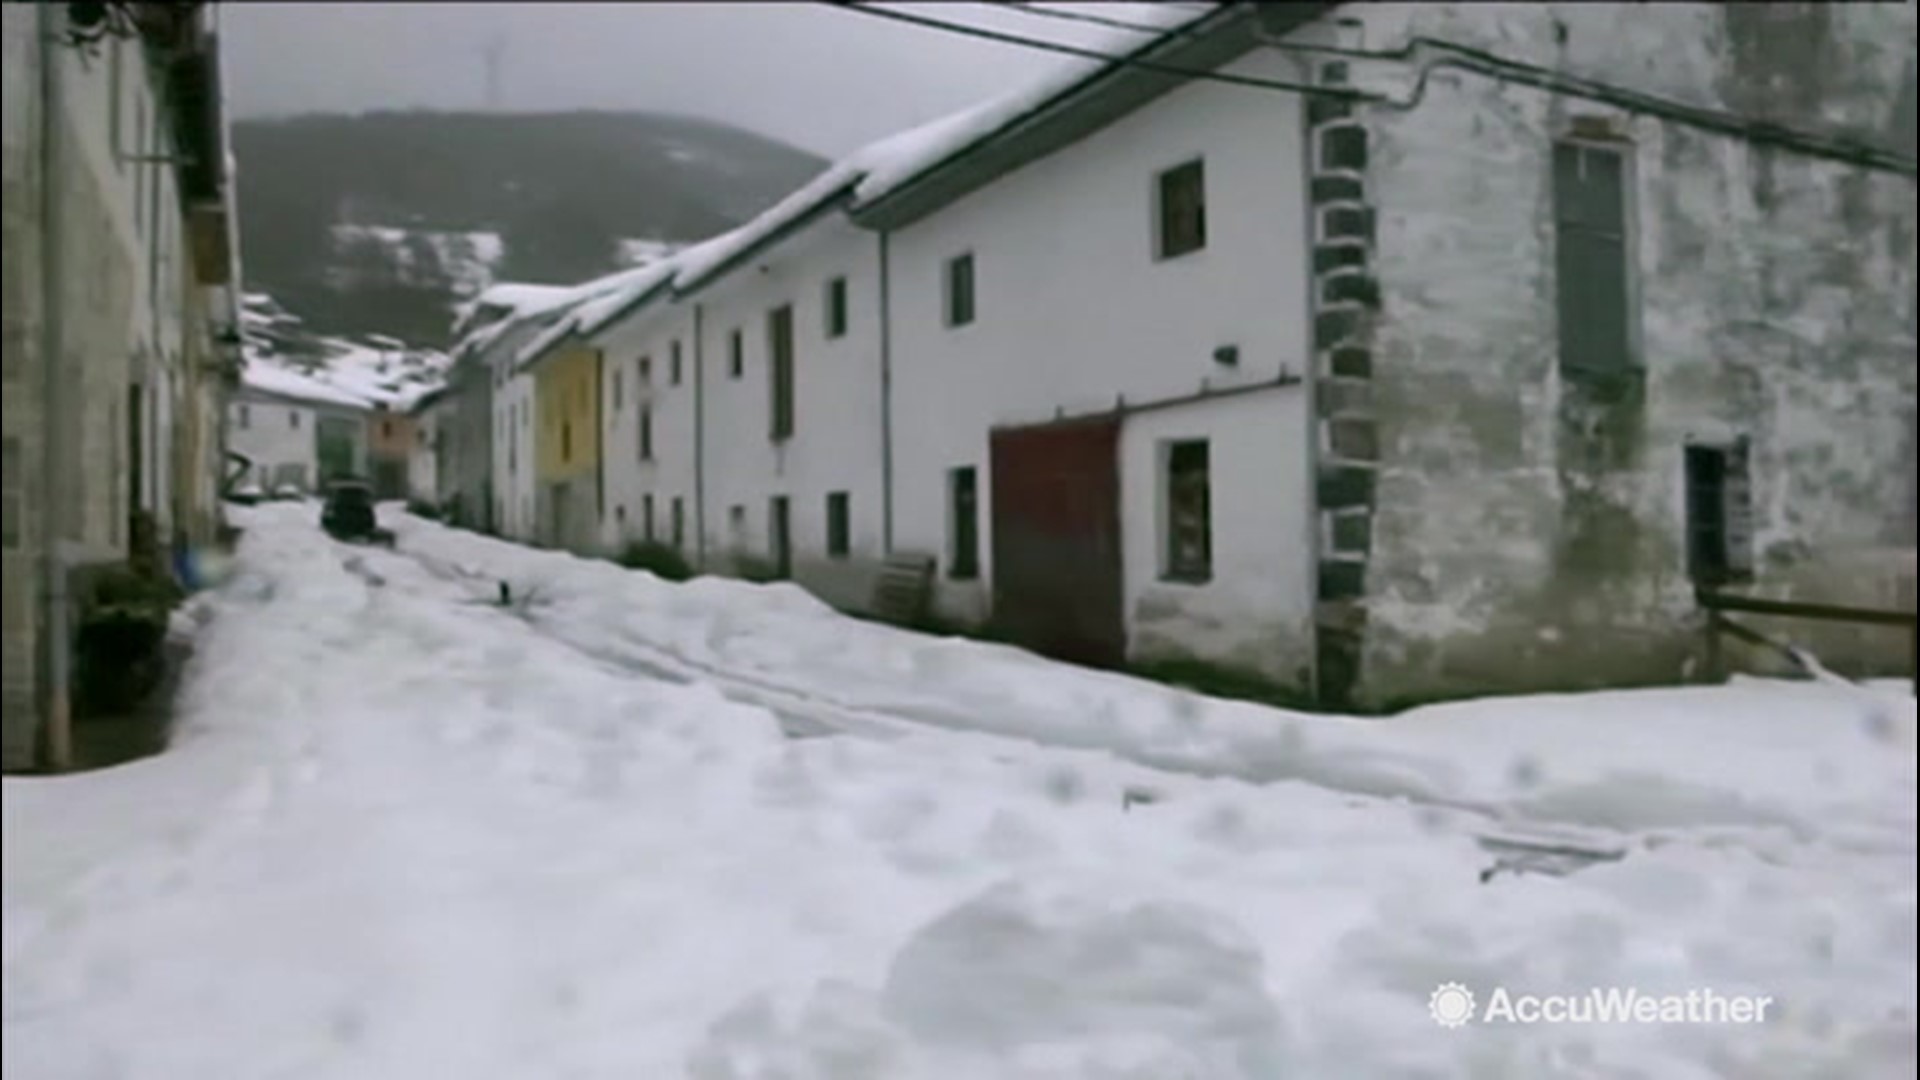 Parts of Spain came to a standstill on Nov. 17, as heavy snow blanketed the region of Asturias, where multiple roads were snow covered or blocked. The heavy snow caused power outages in some villages and increased the threat for avalanches in the mountains.